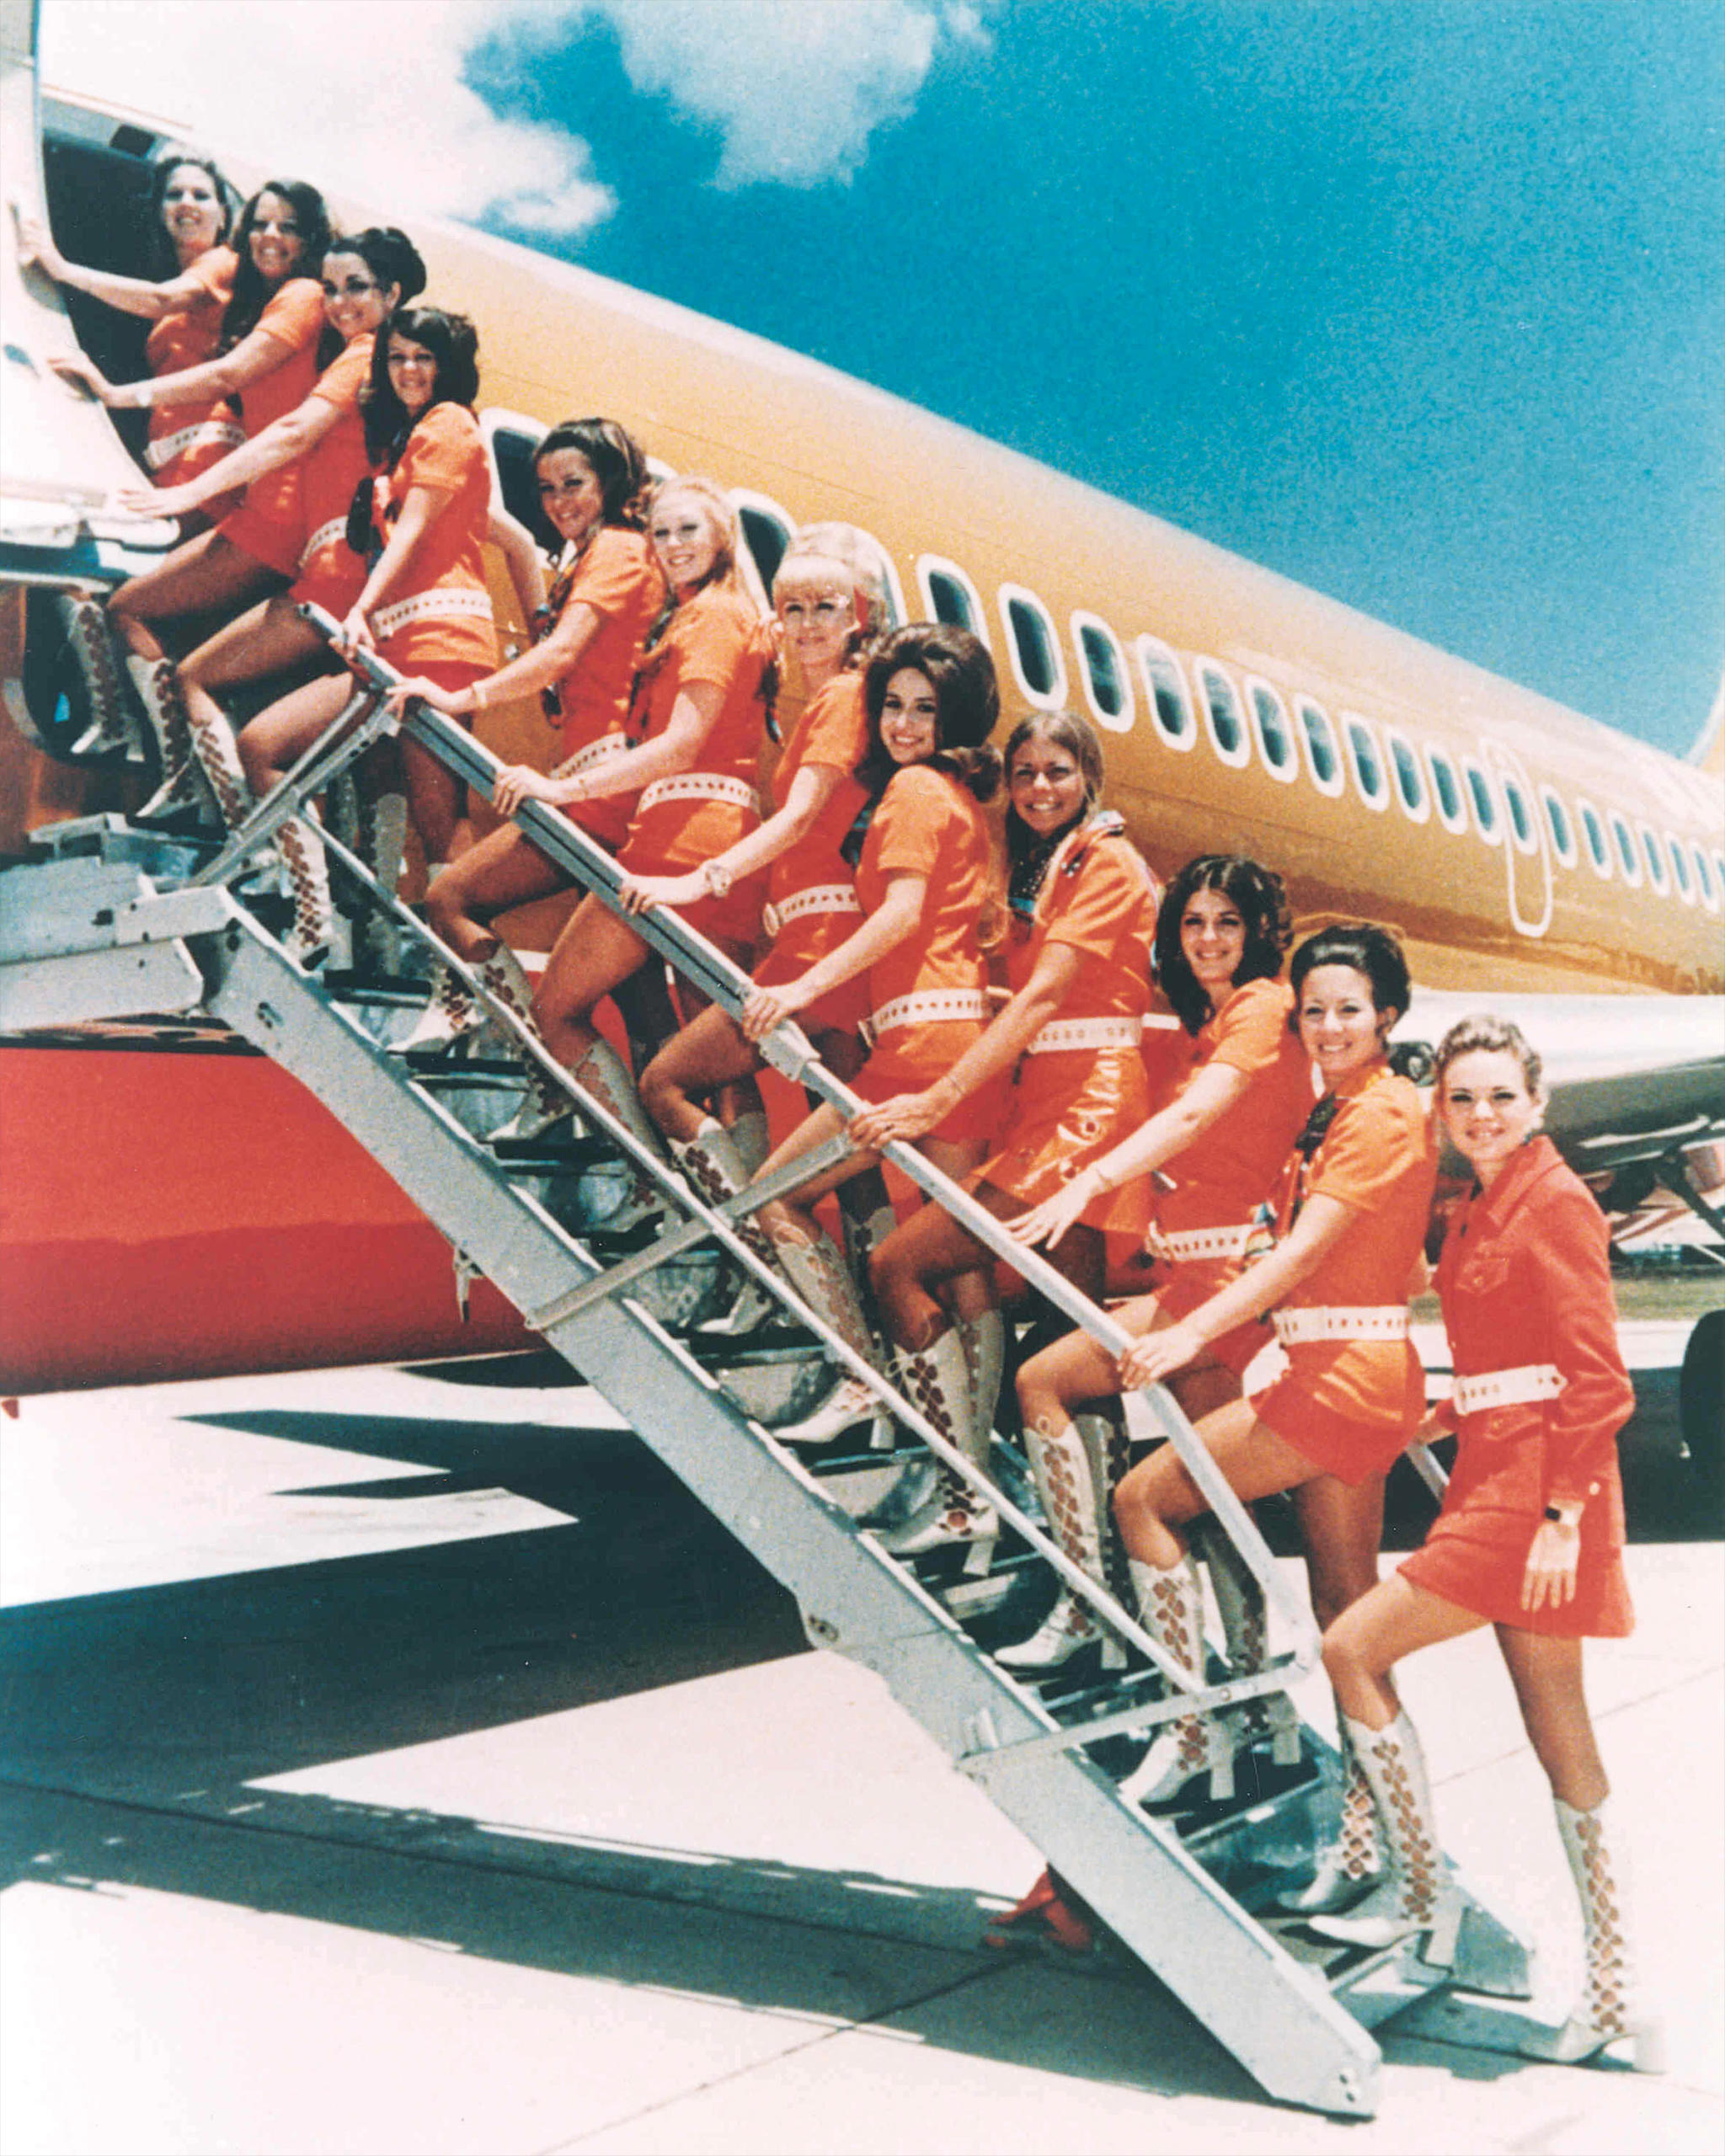 Hot Pants, Love Potions, and the Go-go Genesis of Southwest Airlines pic